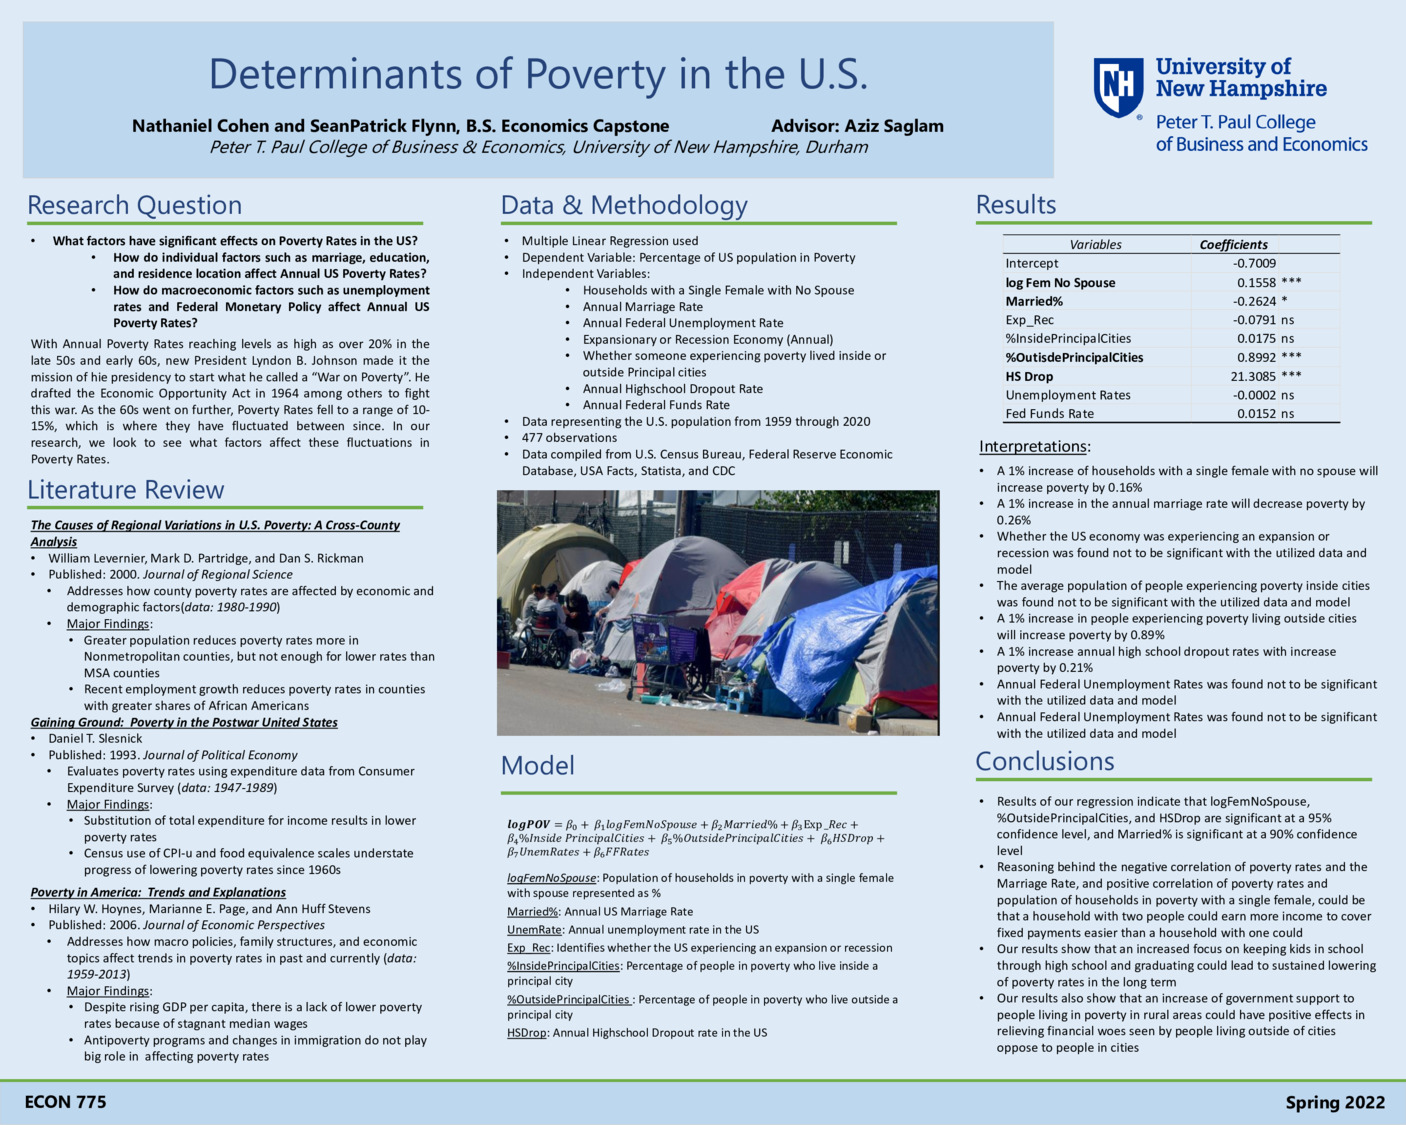 Factors Of Poverty In The U.S. by NCohen24